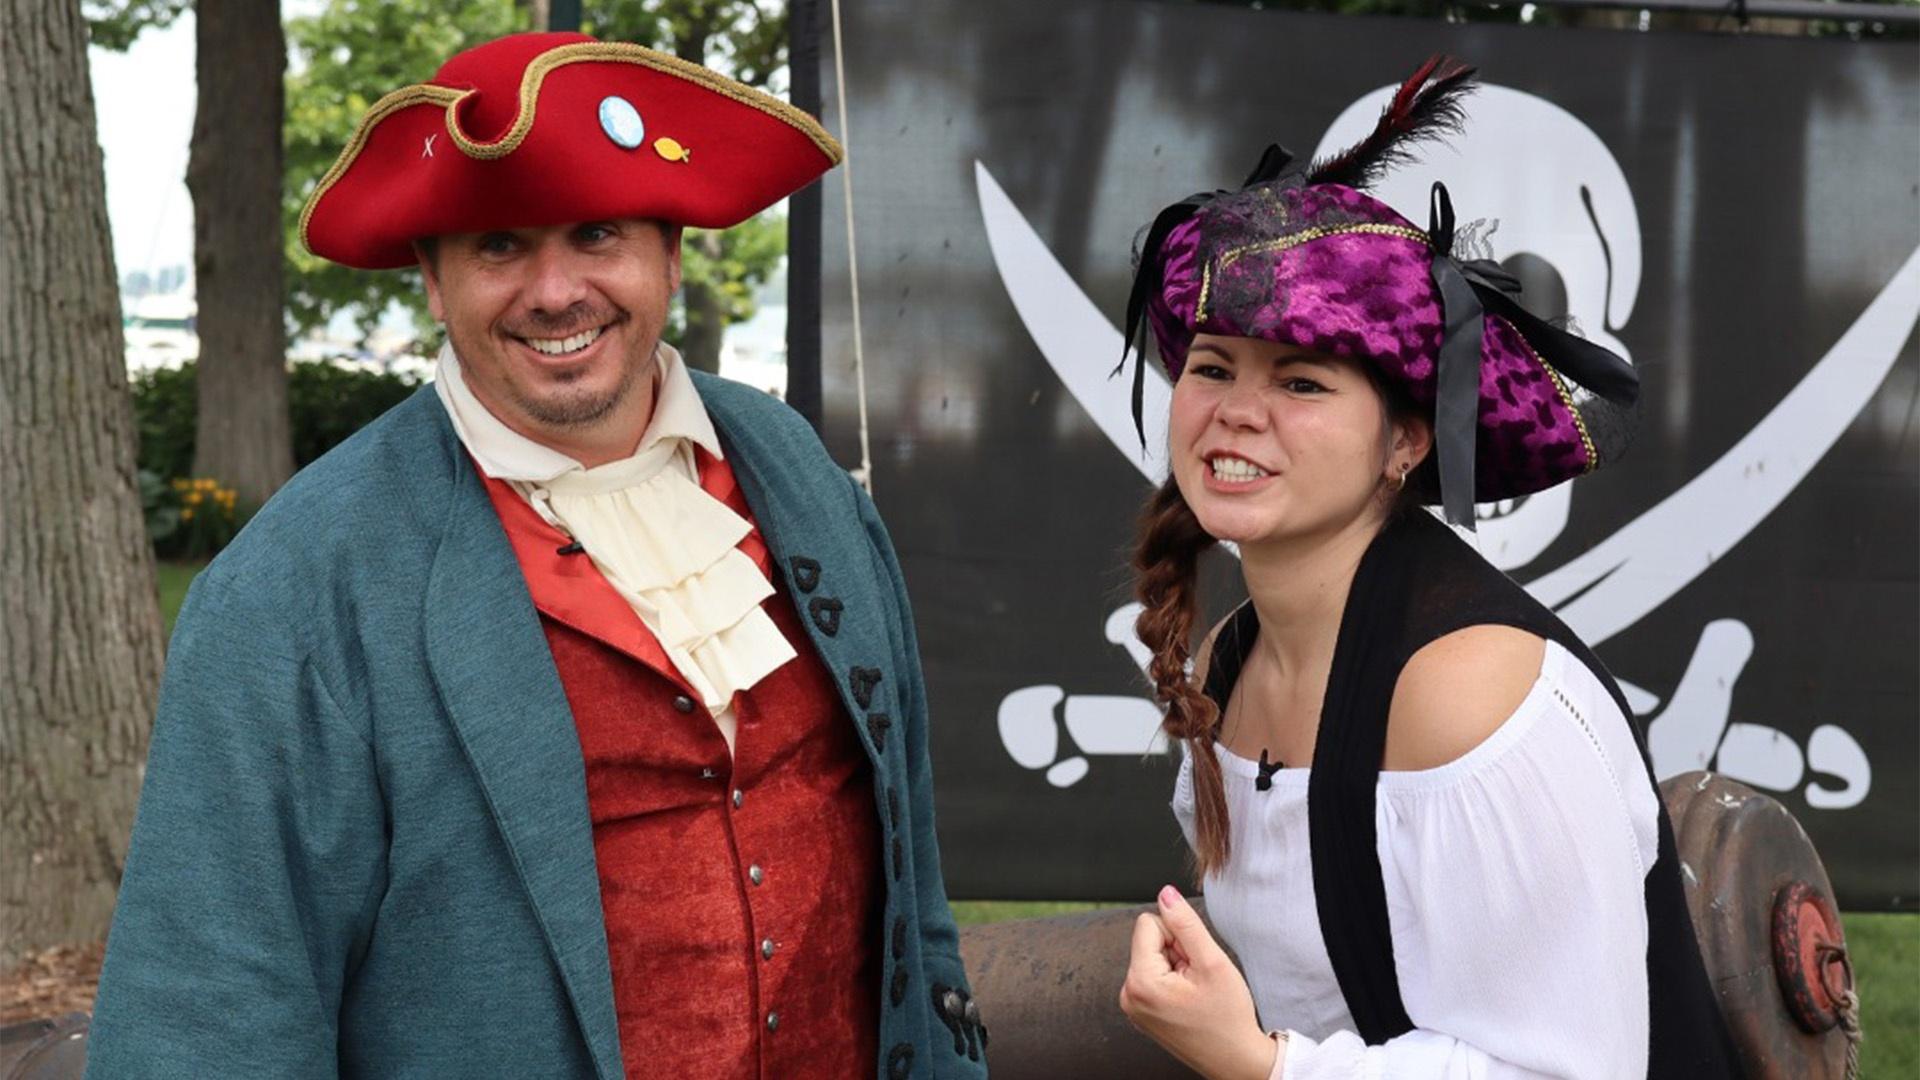 New York dad builds 50-foot pirate ship for daughter for Halloween